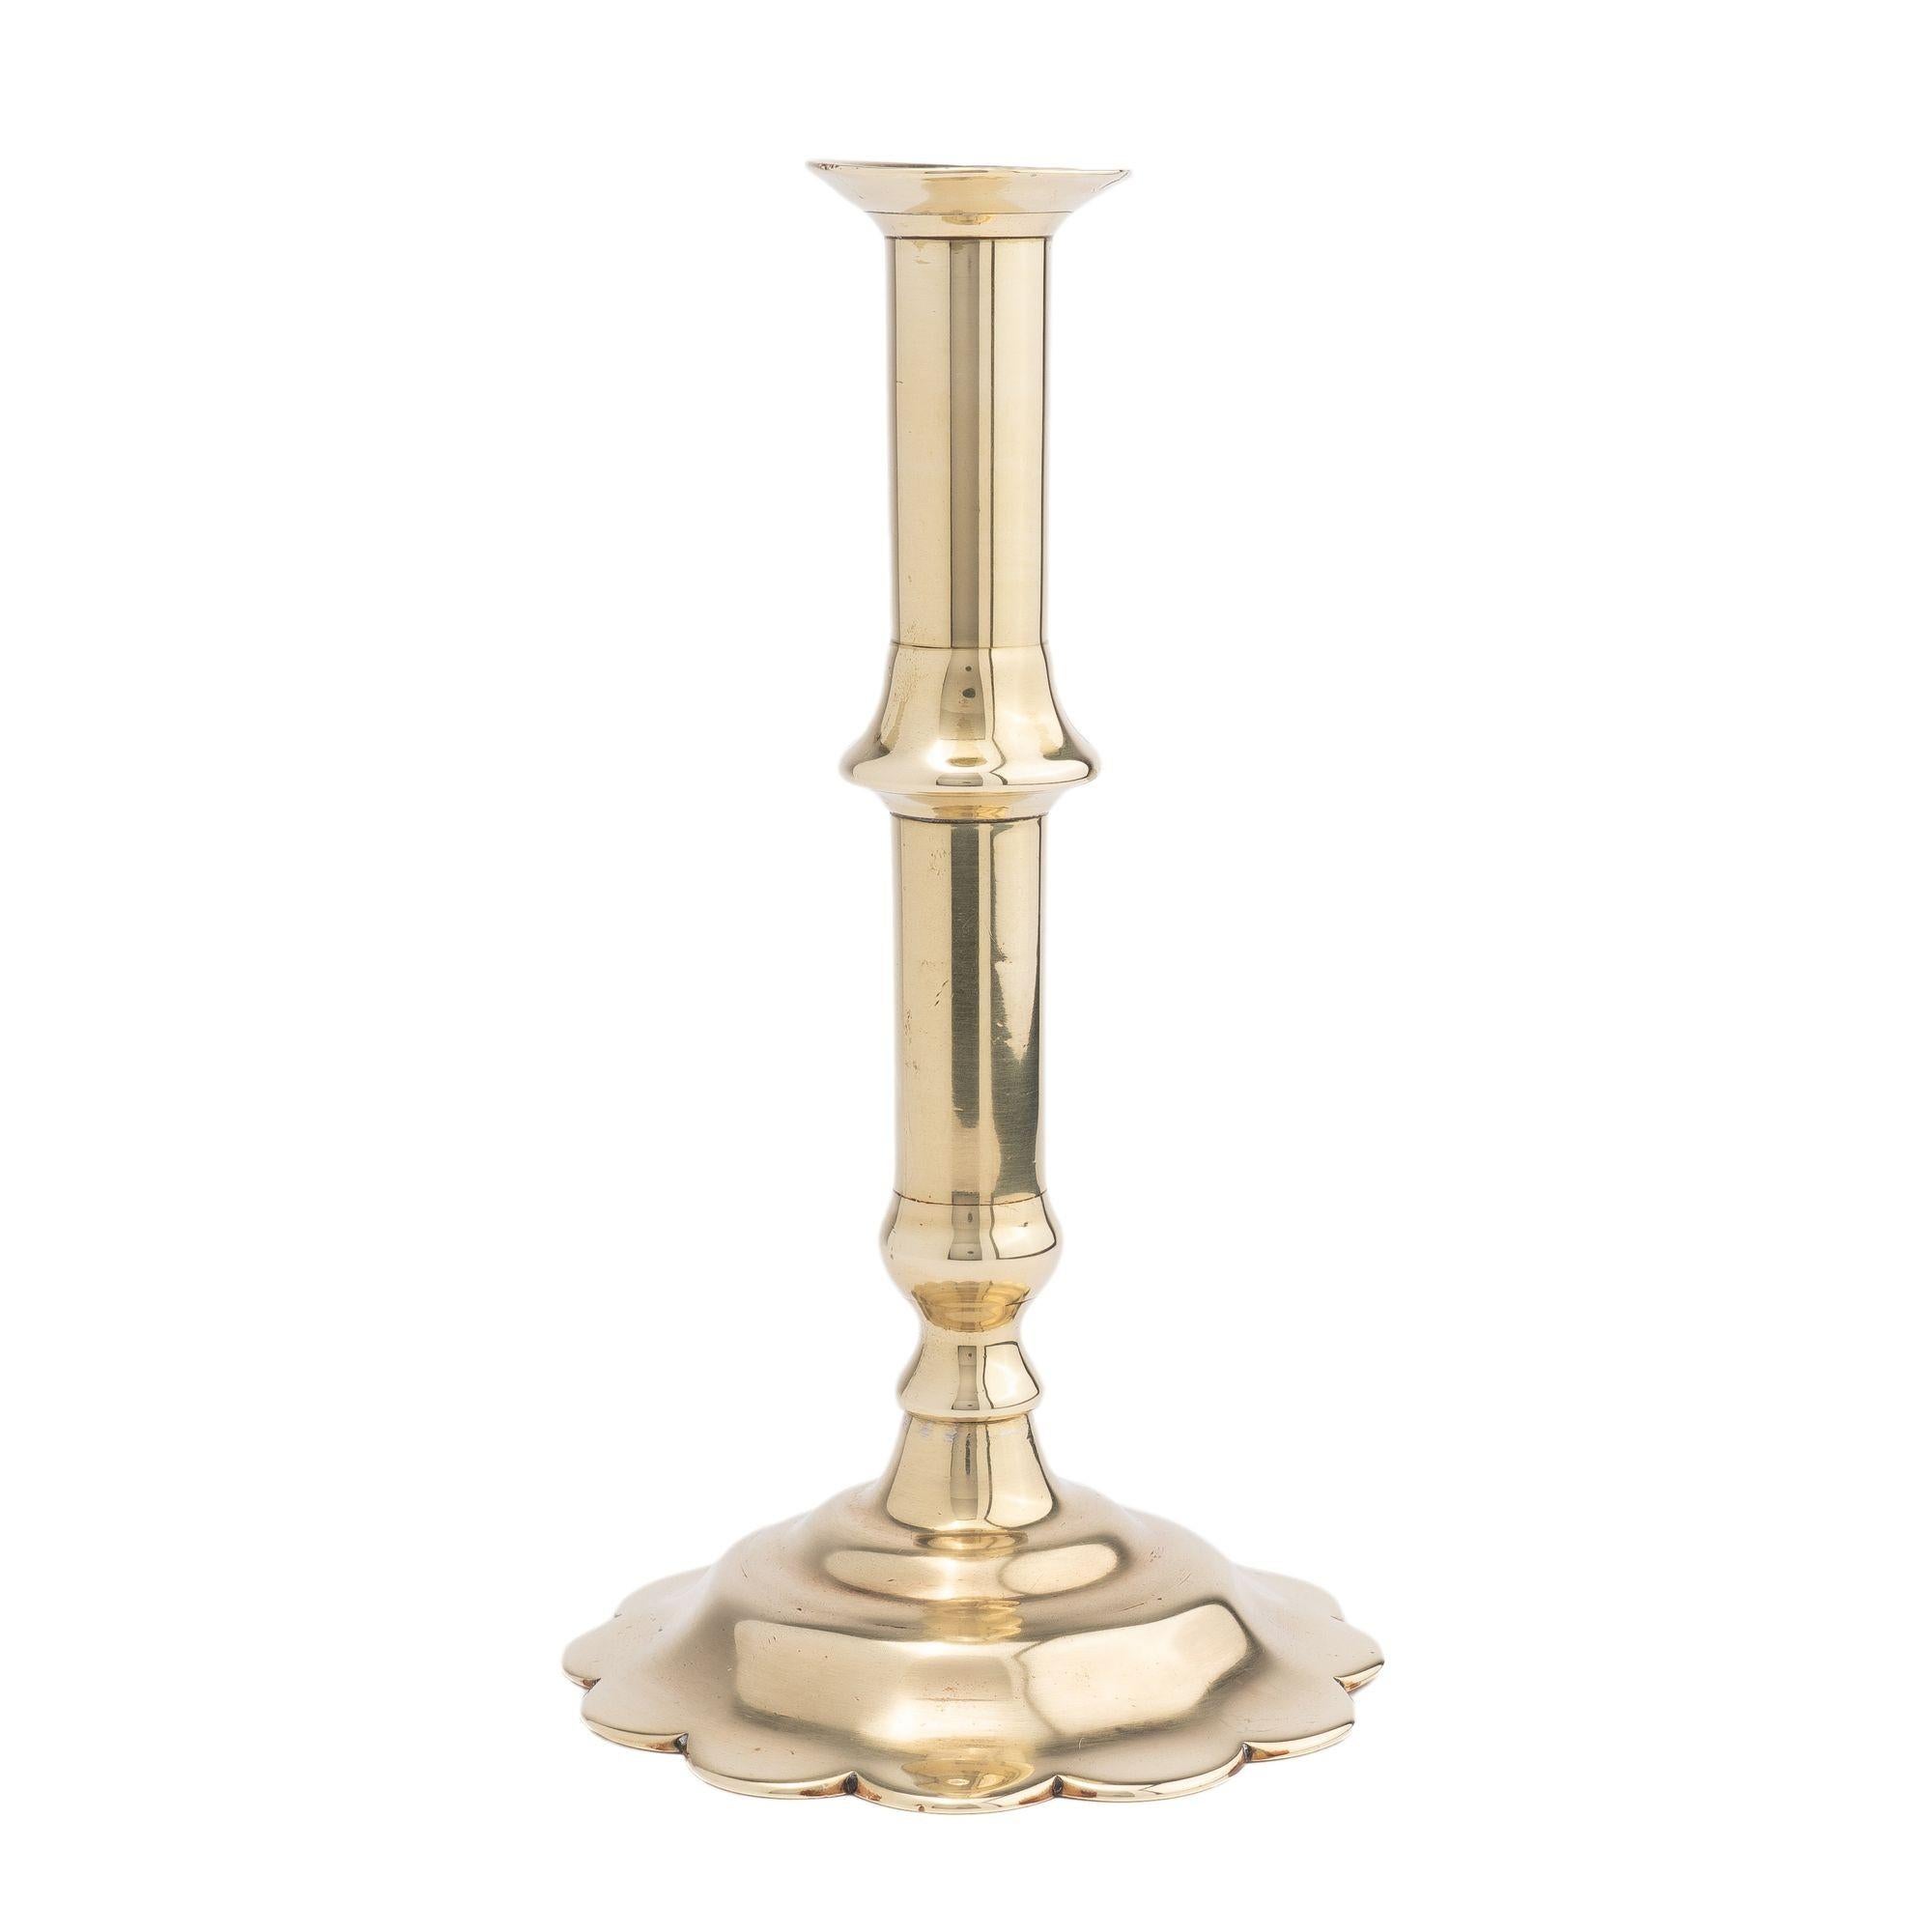 English Georgian cast brass Queen Anne cannon barrel shaft candlestick, with push up candle ejector, peened to a petal base.

Birmingham, England, circa 1760.